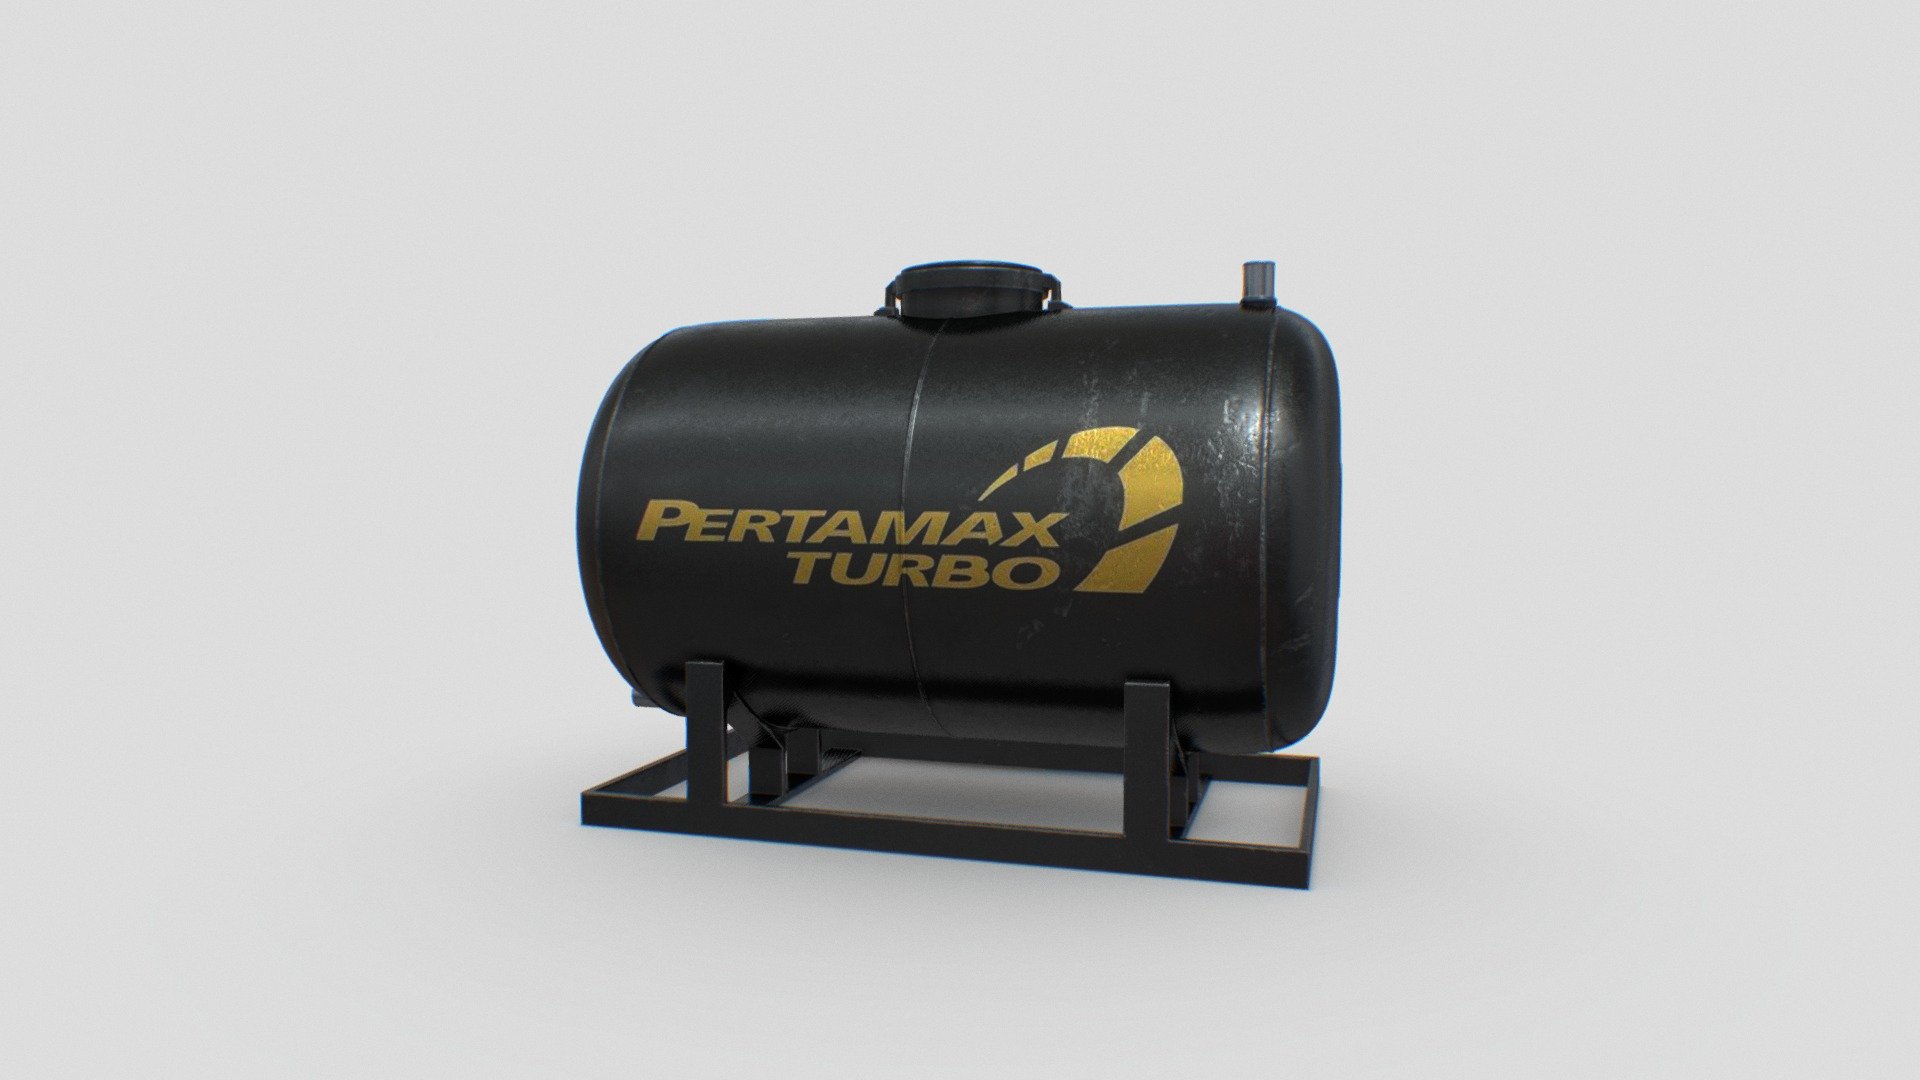 Fuel Tank 251x150x150

This model I made it with Blender. I made it with actual size reference.
I include some file format (exported from Blender),texture, some sample render and also I include the lighting setup on the Blender file. 
Hopefully you enjoy it. 
Or, you can edit my model with your preferense easily.

Please like and share if you enjoy it 3d model